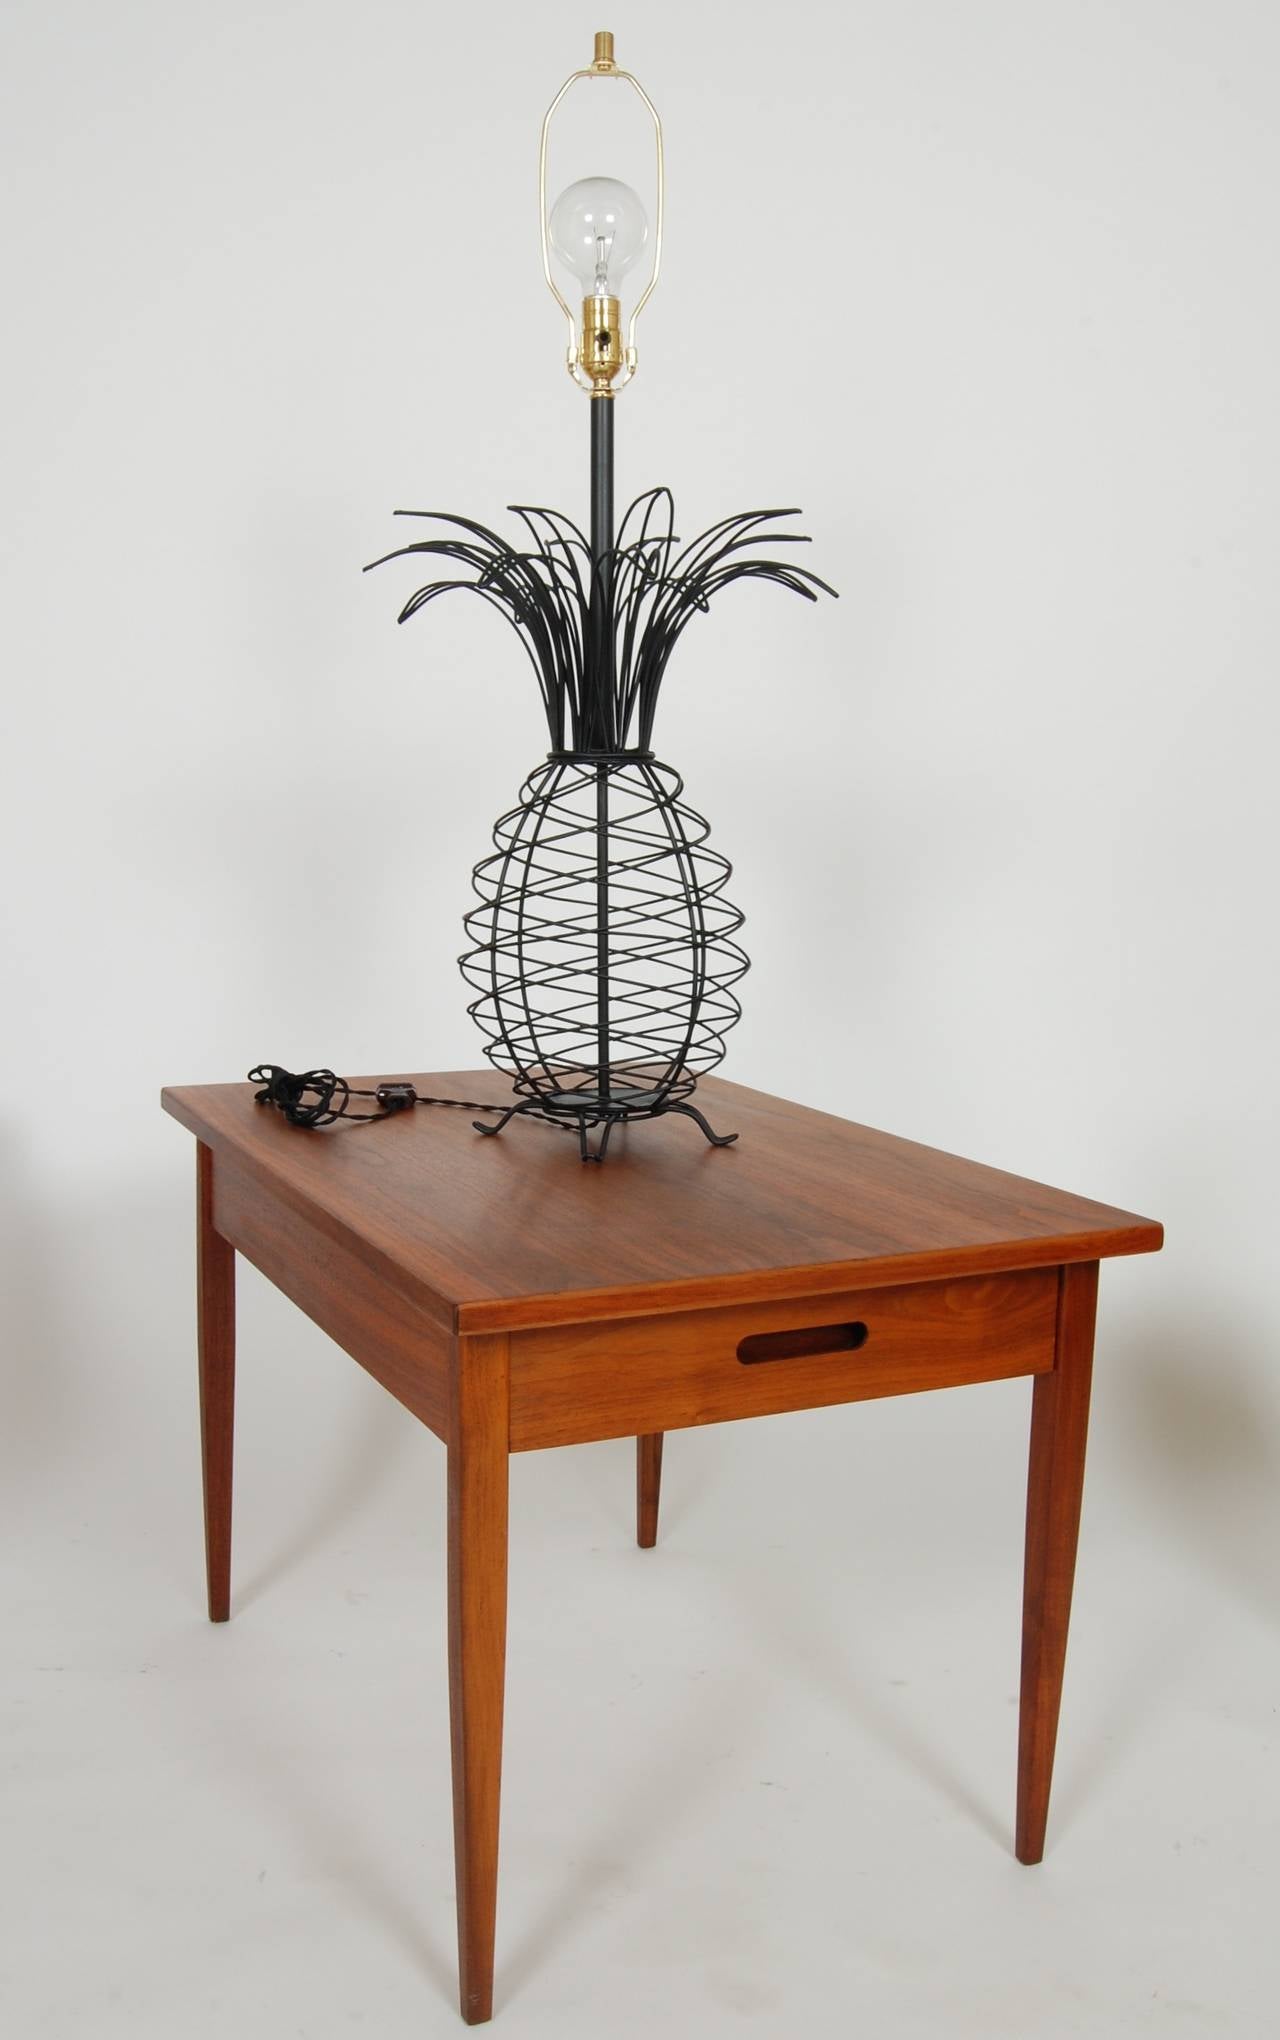 American Wire Form Pineapple Lamp